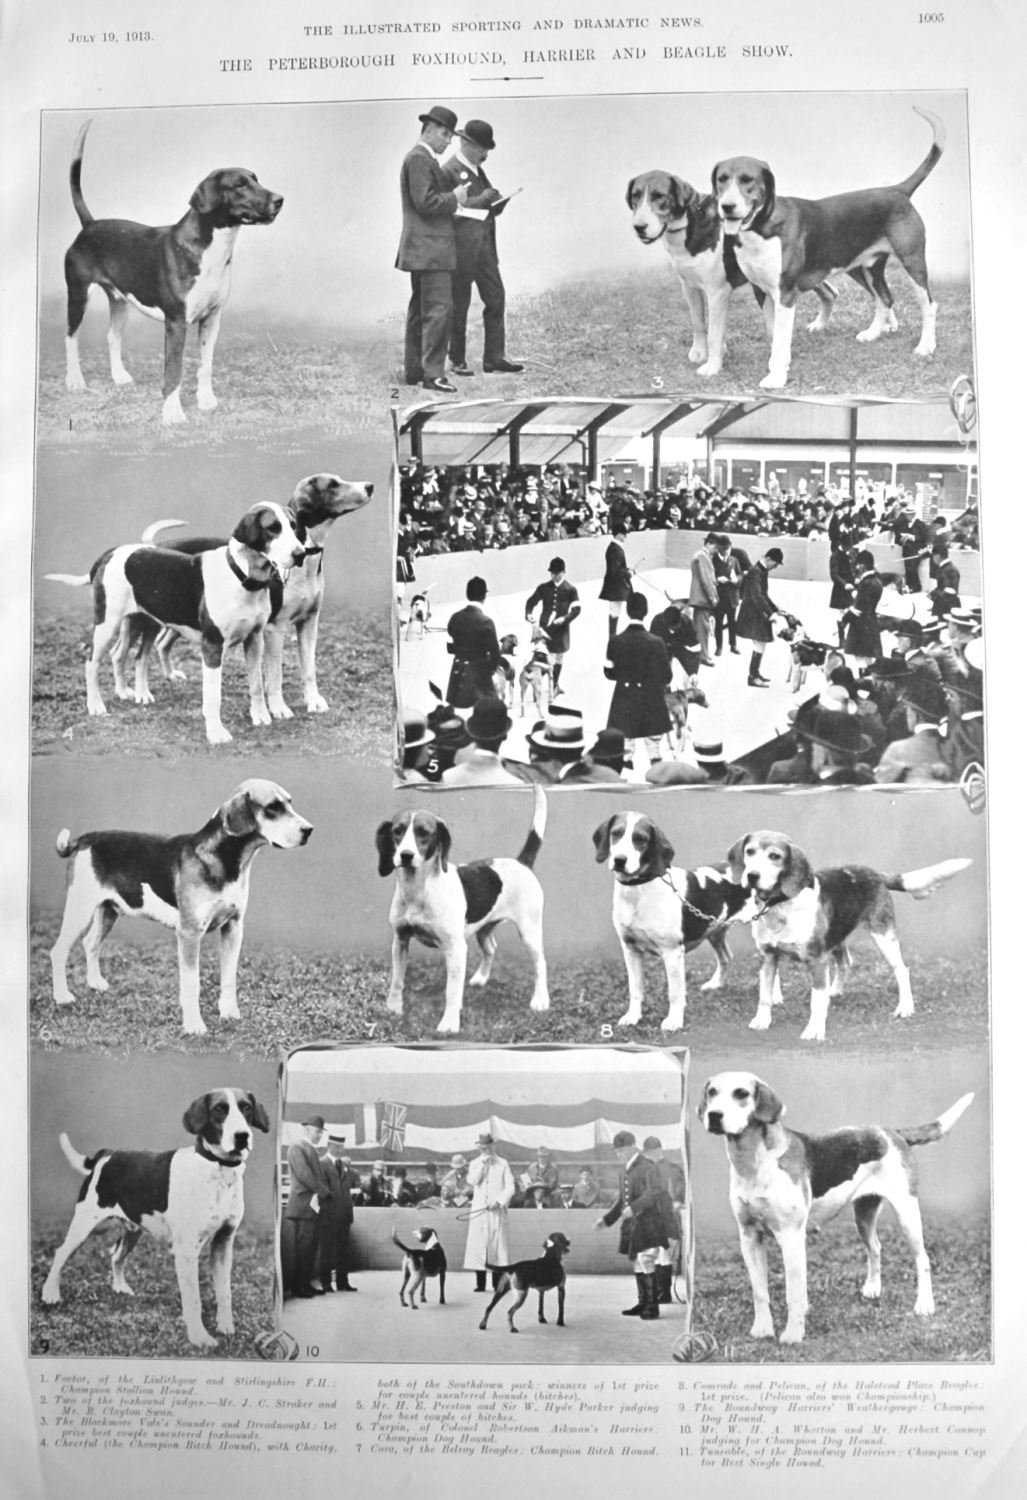 The Peterborough Foxhound, Harriers and Beagle Show.  1913.